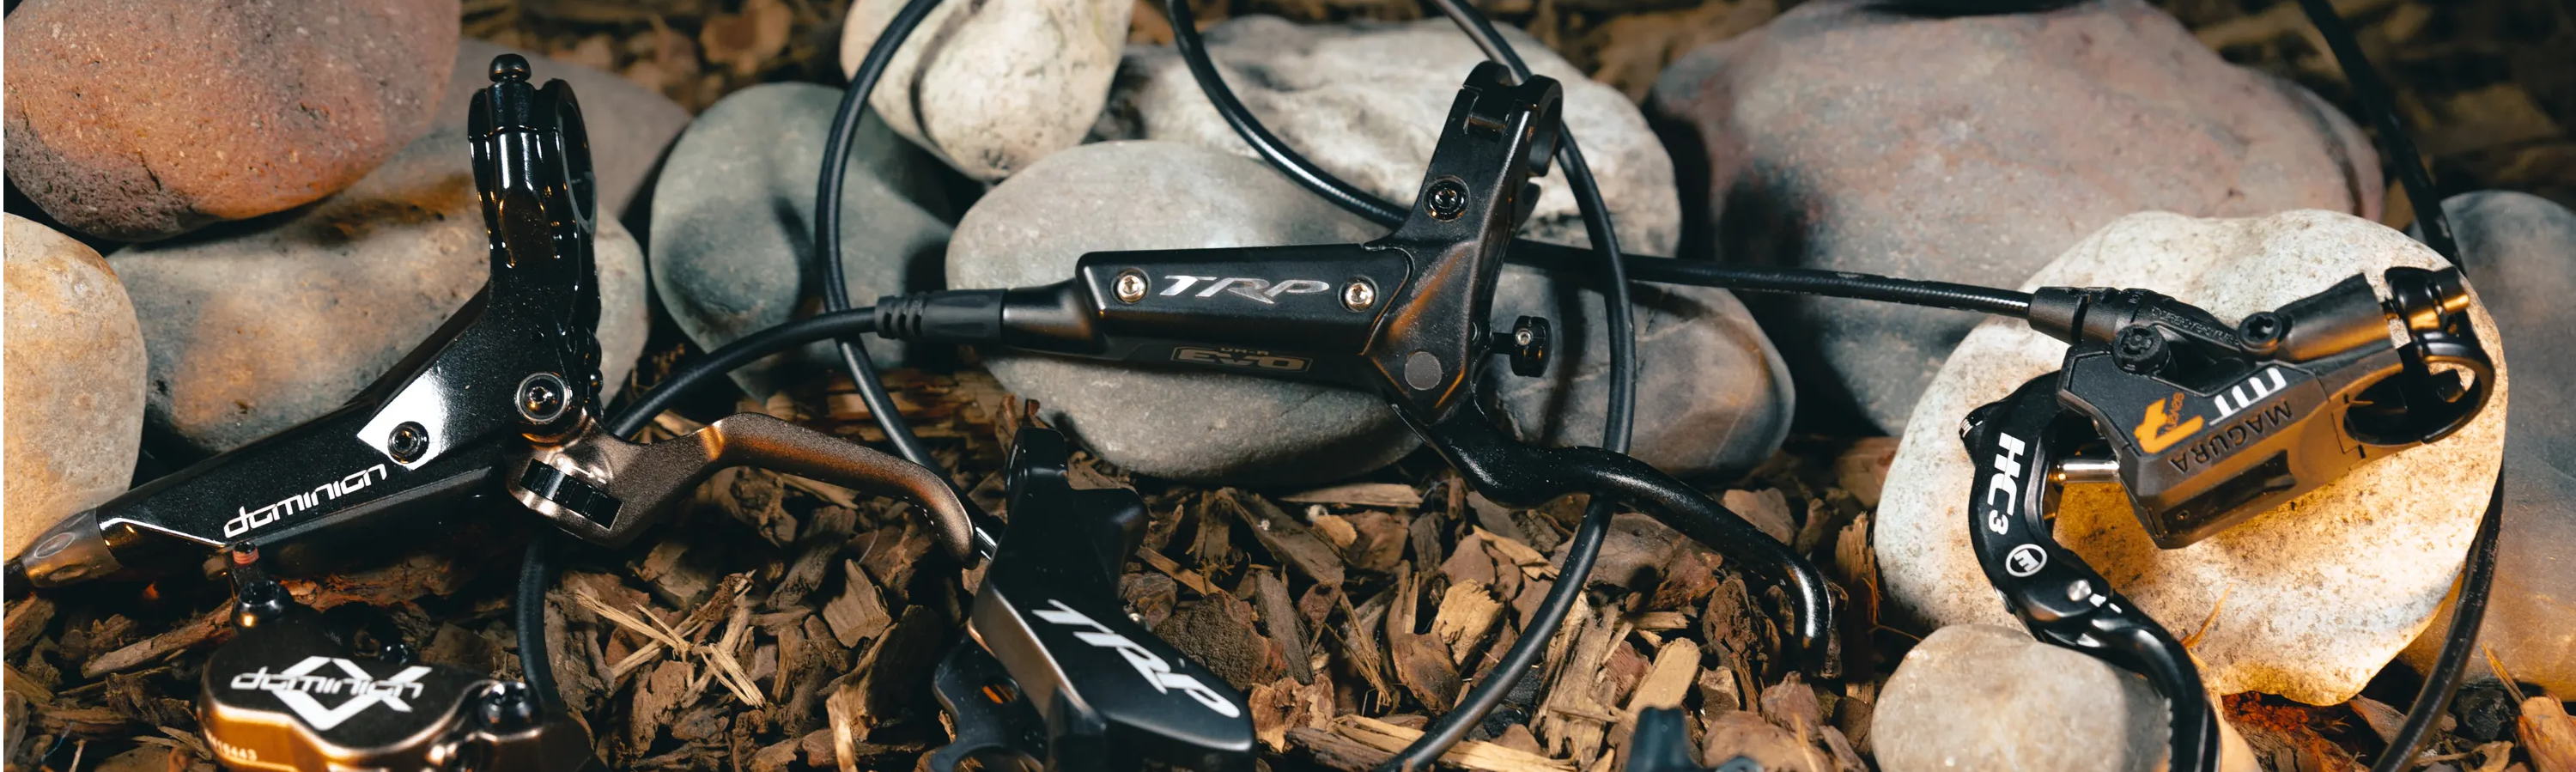 Hayes dominion a4 trp dh-r evo and magura mt7 mountain bike brakes on bark chips comparison